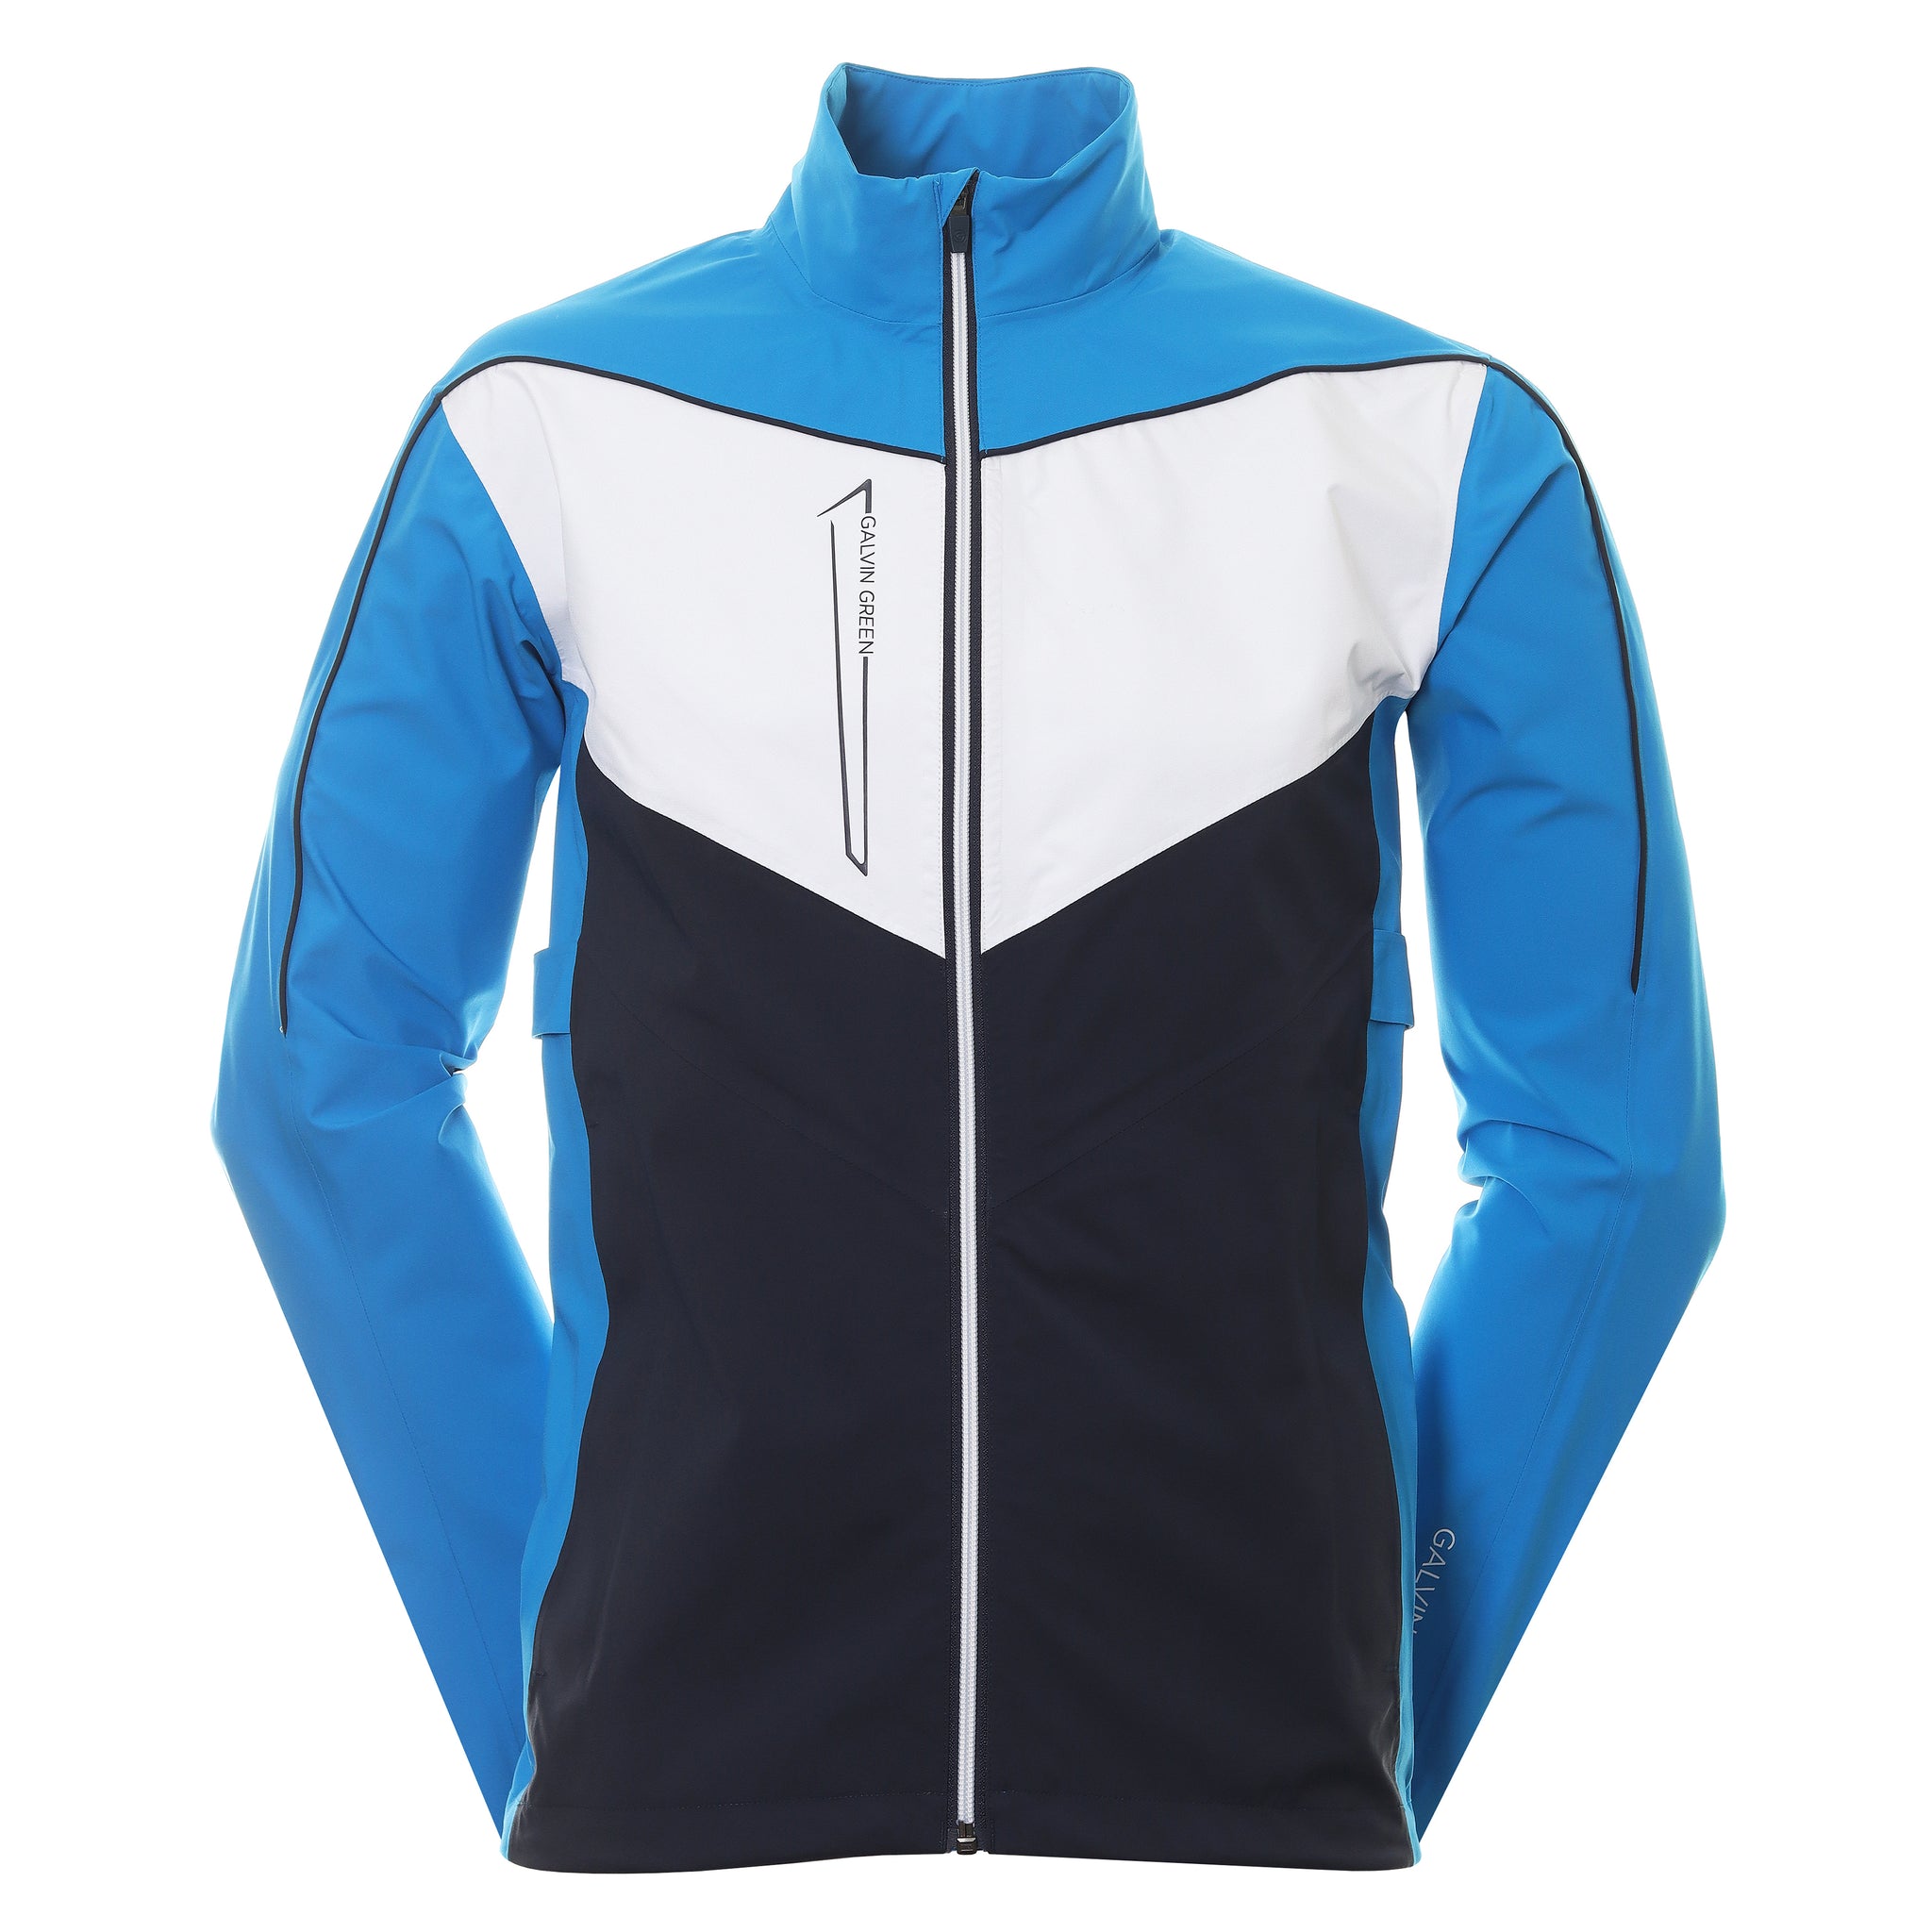 galvin-green-armstrong-paclite-gore-tex-waterproof-golf-jacket-blue-navy-white-9167